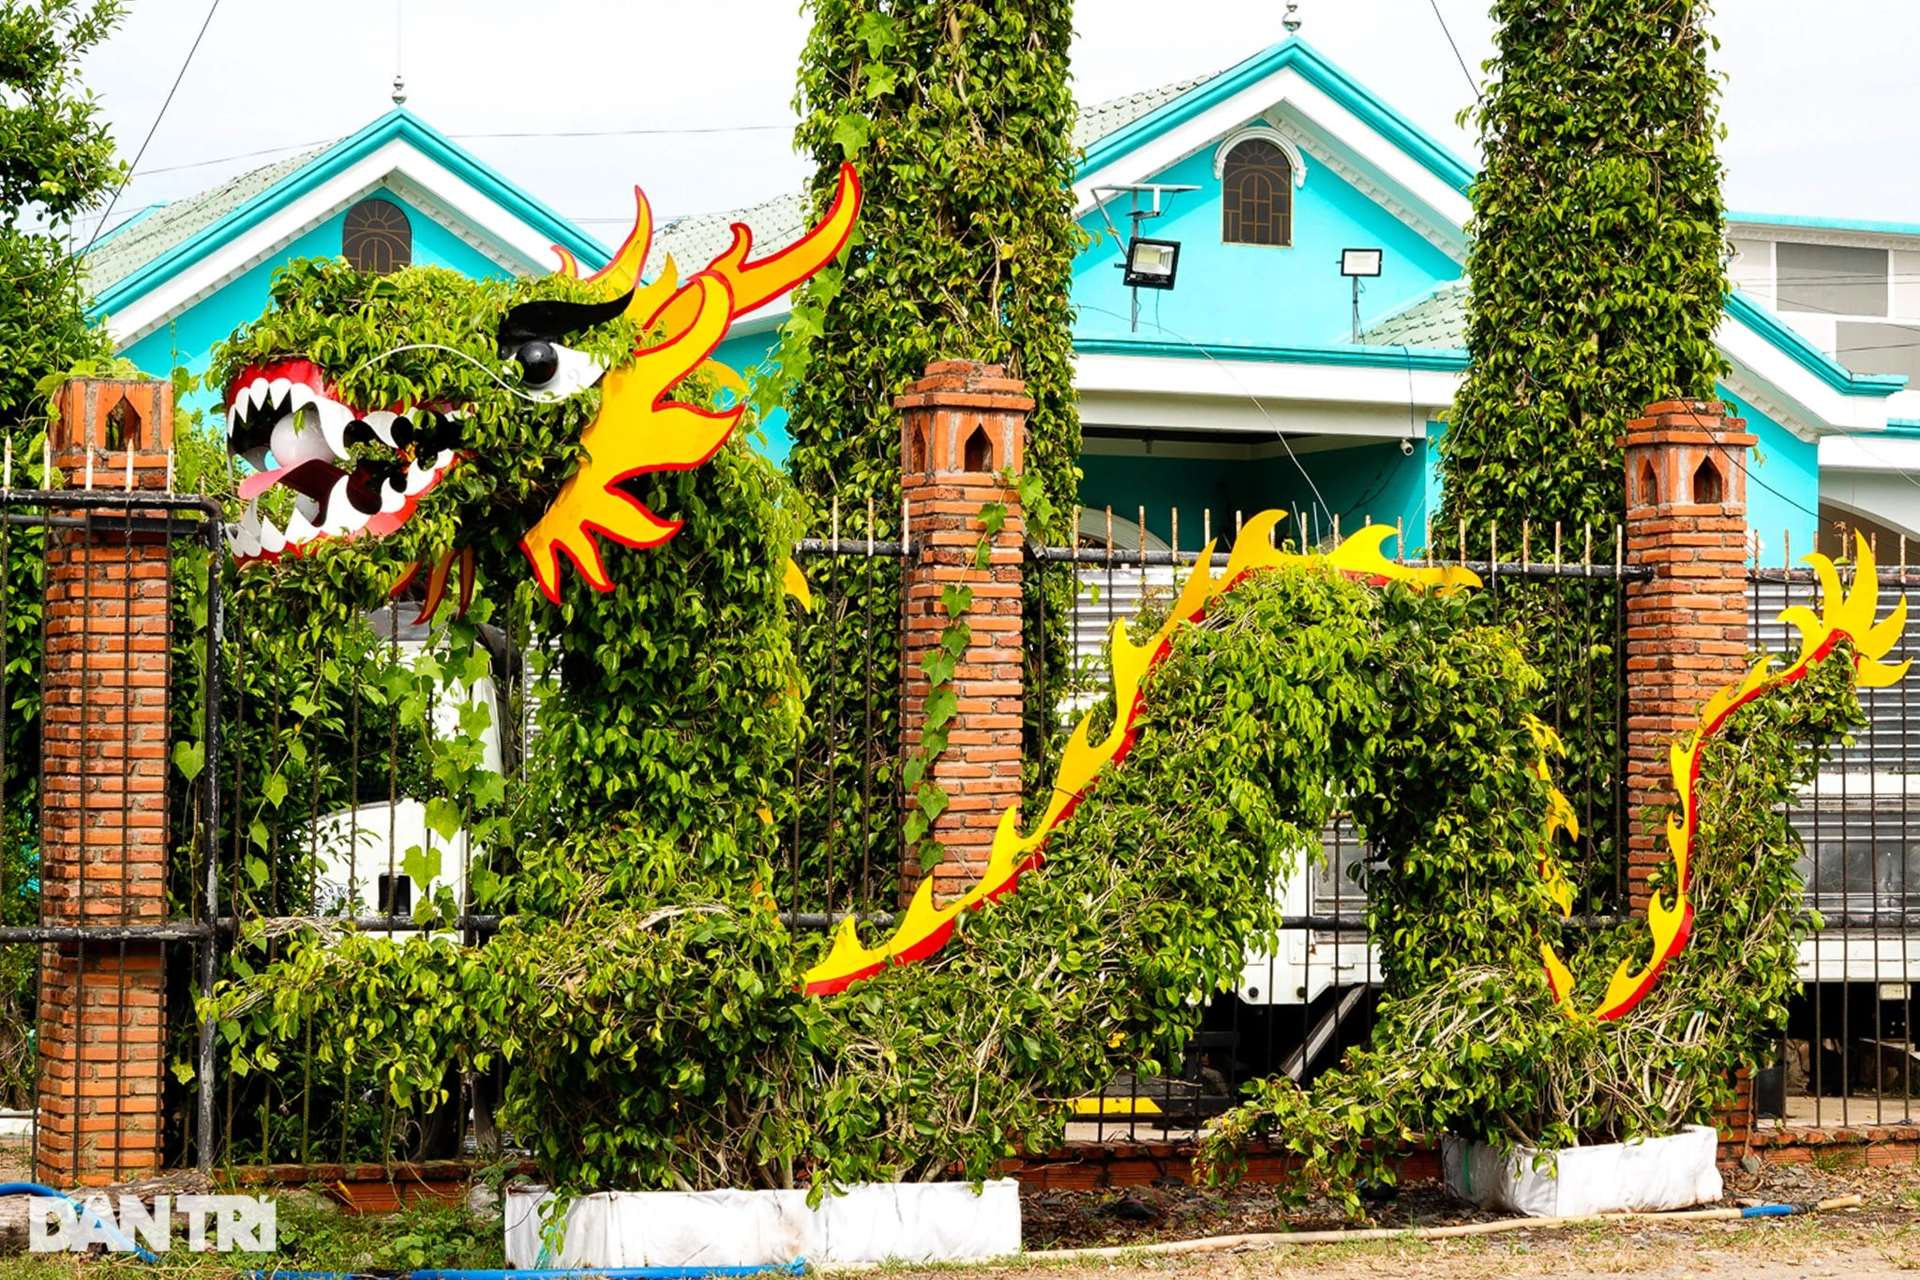 Making dragon mascots from kumquats and ornamental flowers, farmers sell one to make millions - 2